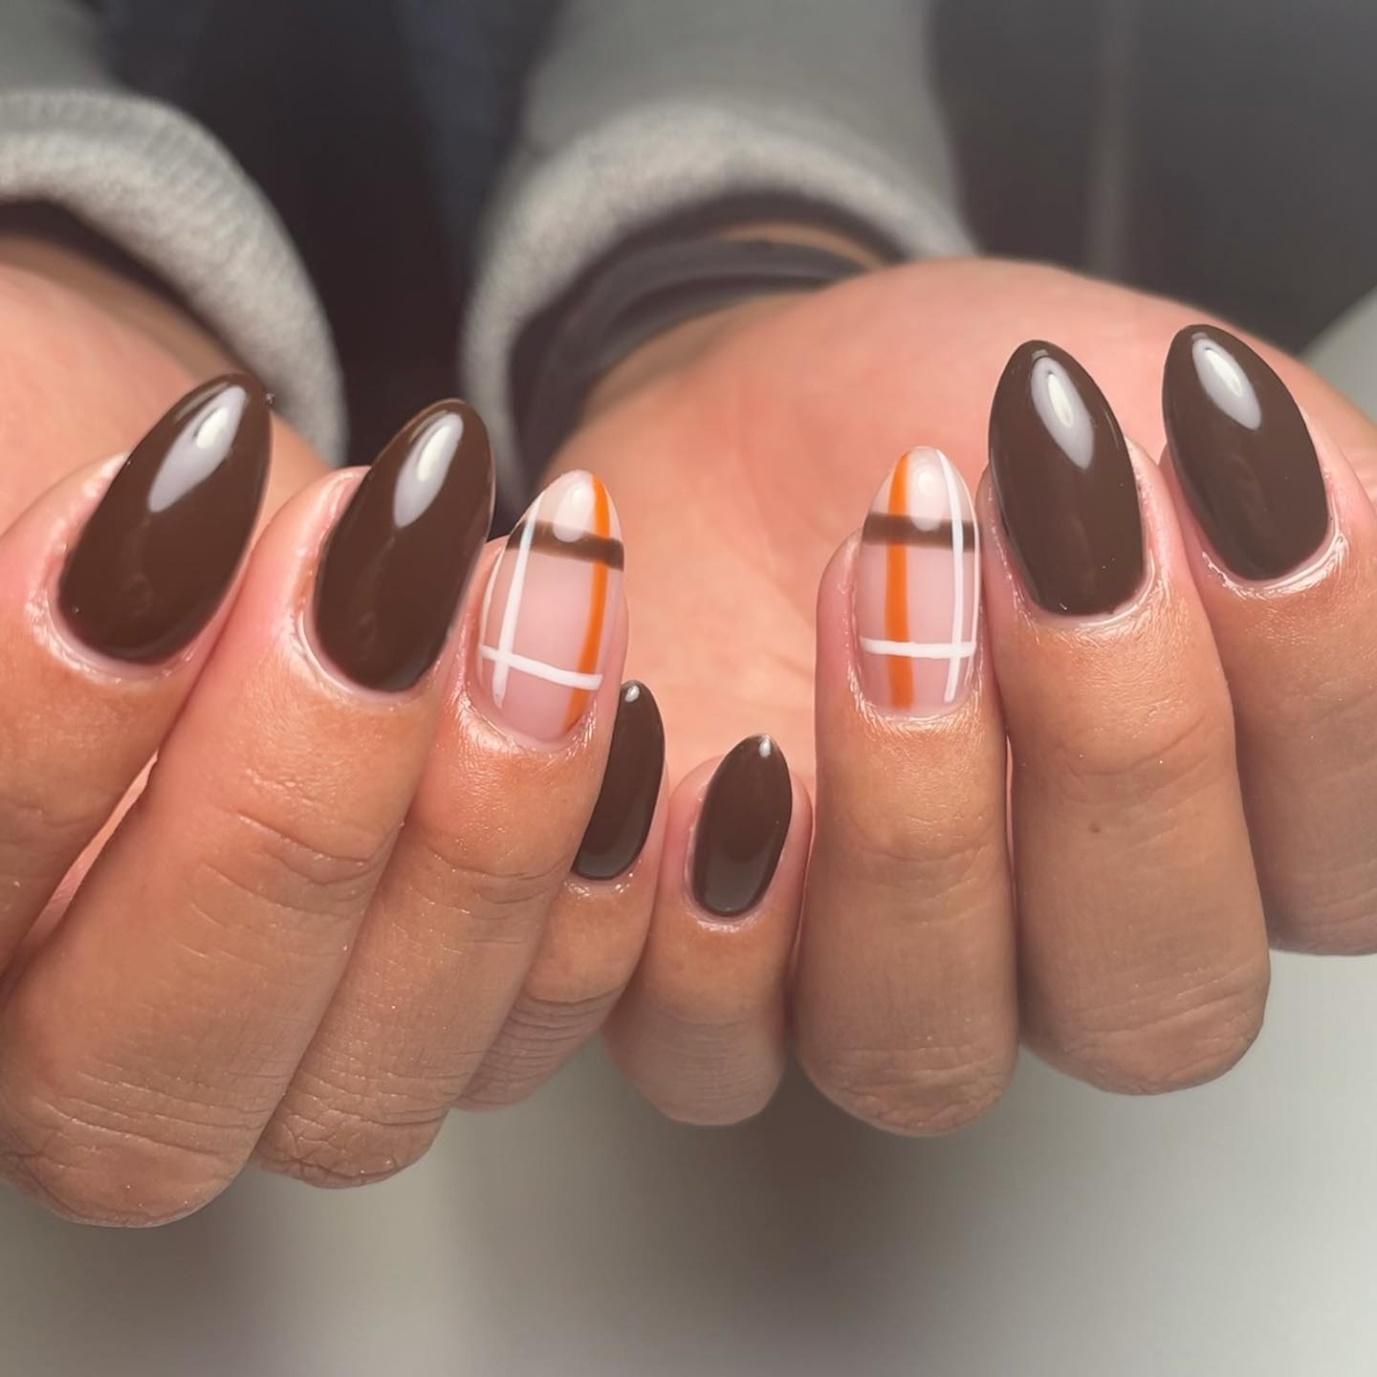 Plaid Accents with Almond Brown Nails